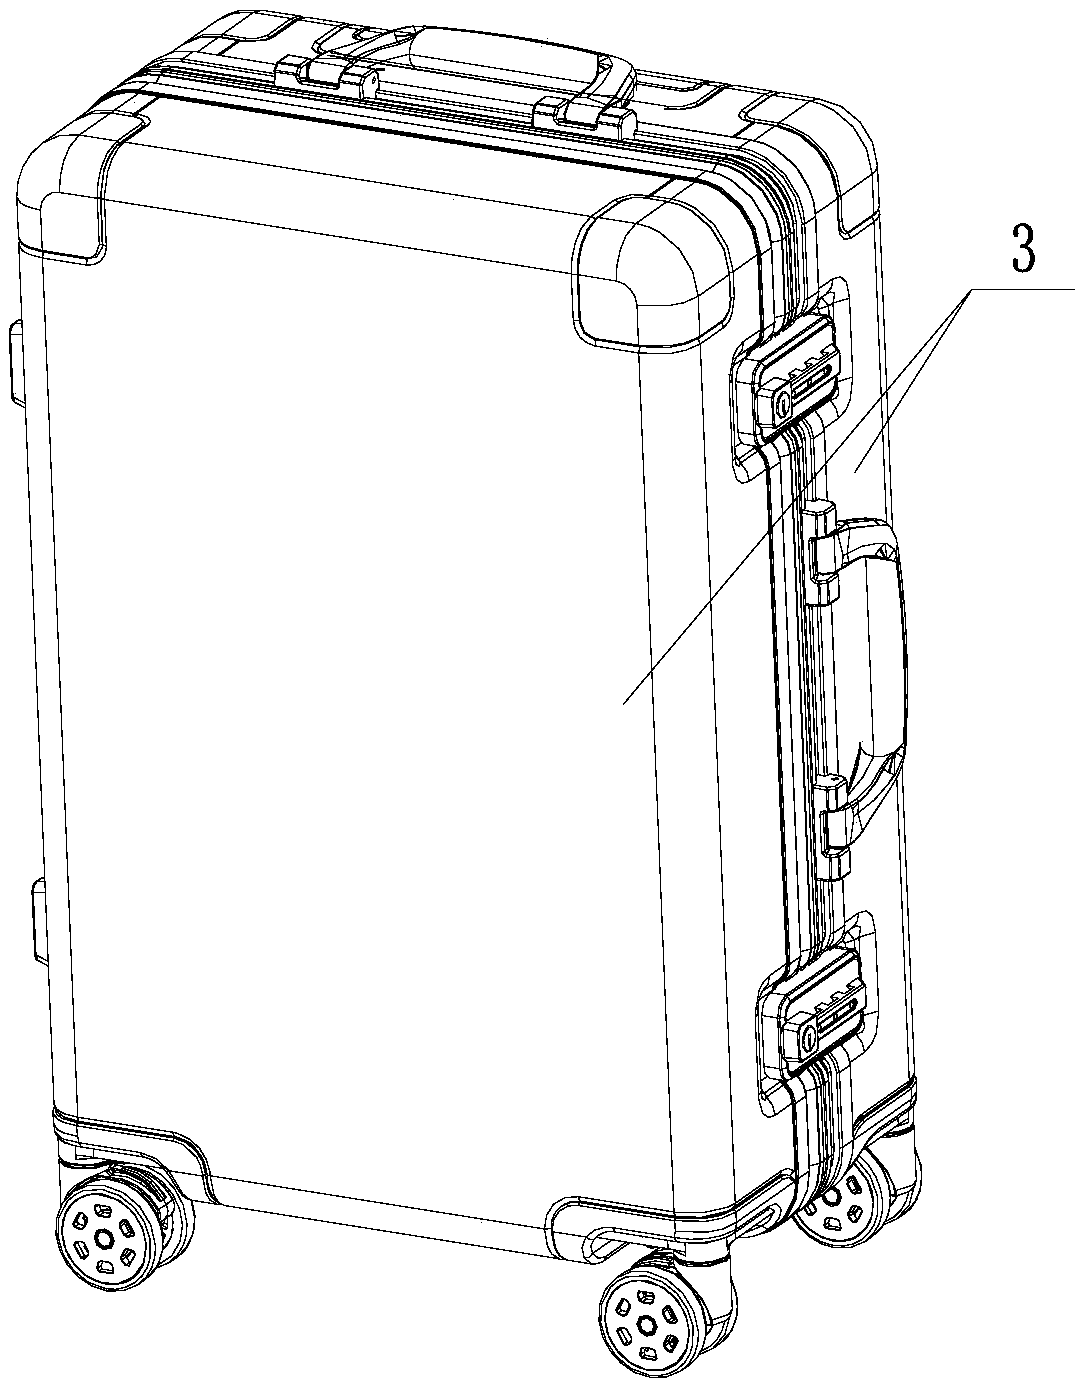 Case shell processing method and assembled case shell for rigid luggage